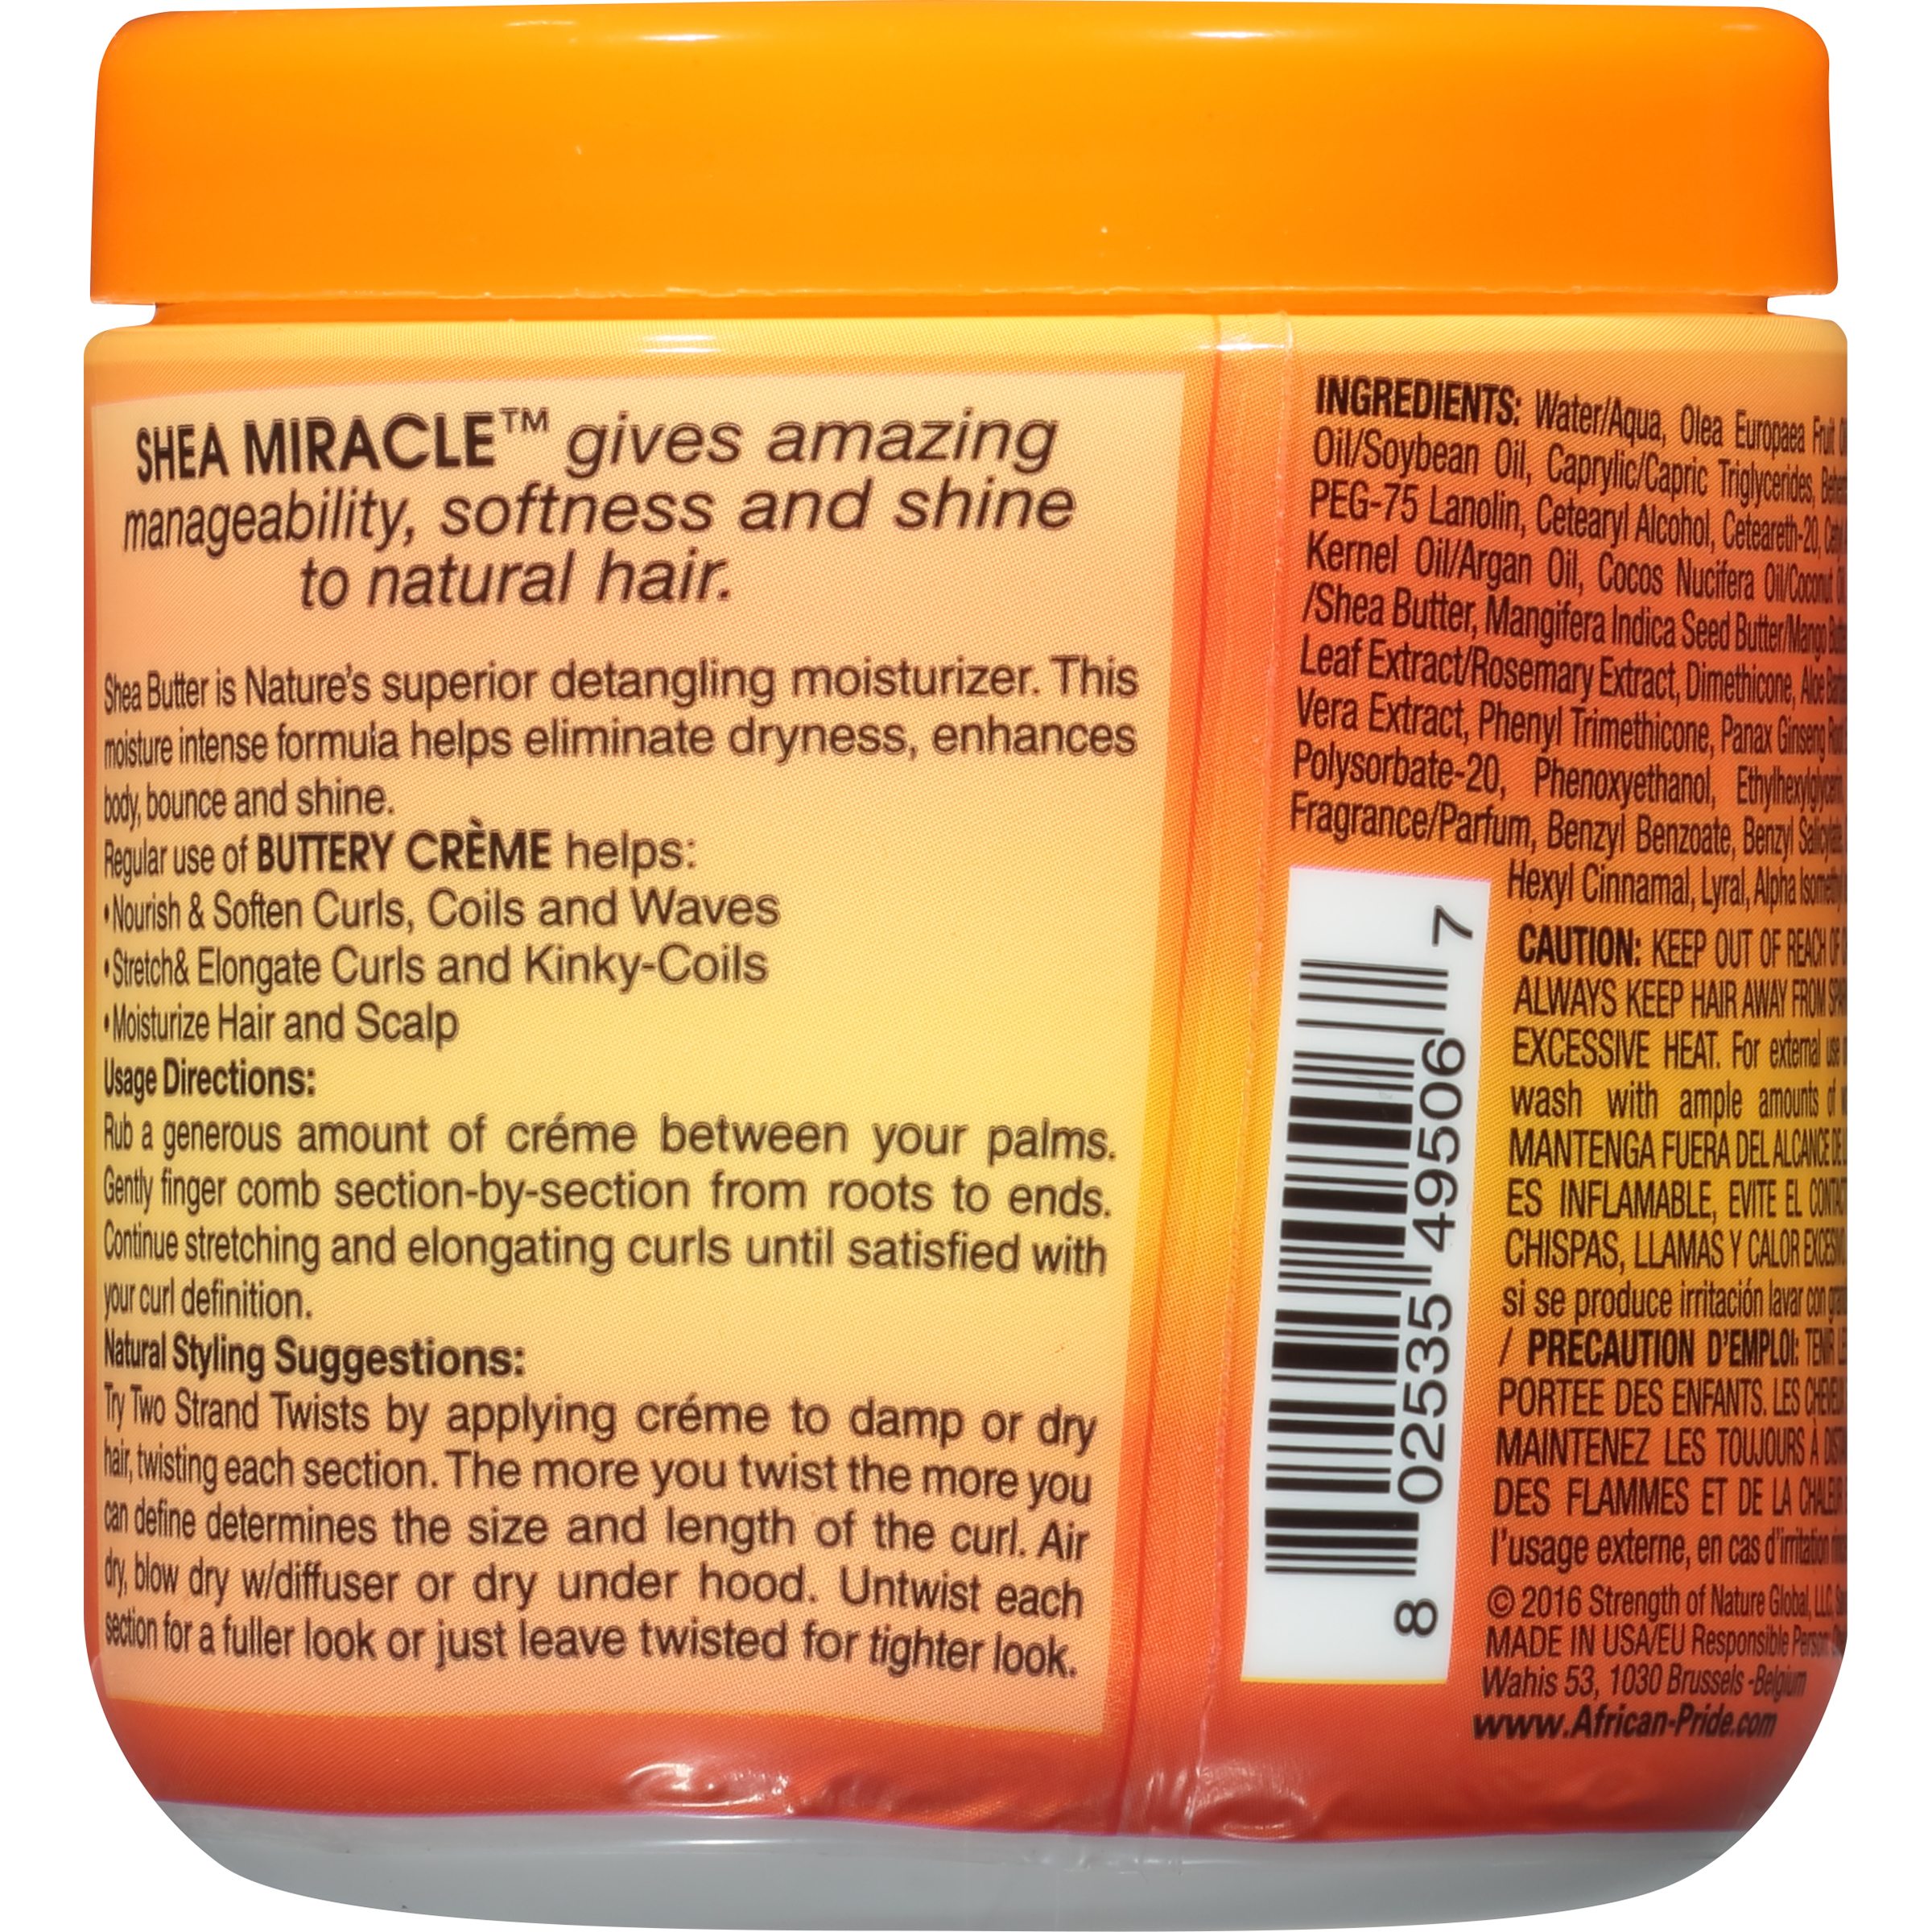 African Pride Shea Miracle Moisture Intense Buttery Leave In Cream Hair Moisturizer for Wavy, Curly, Coily Hair with Shea Butter, 6 oz. - image 3 of 6